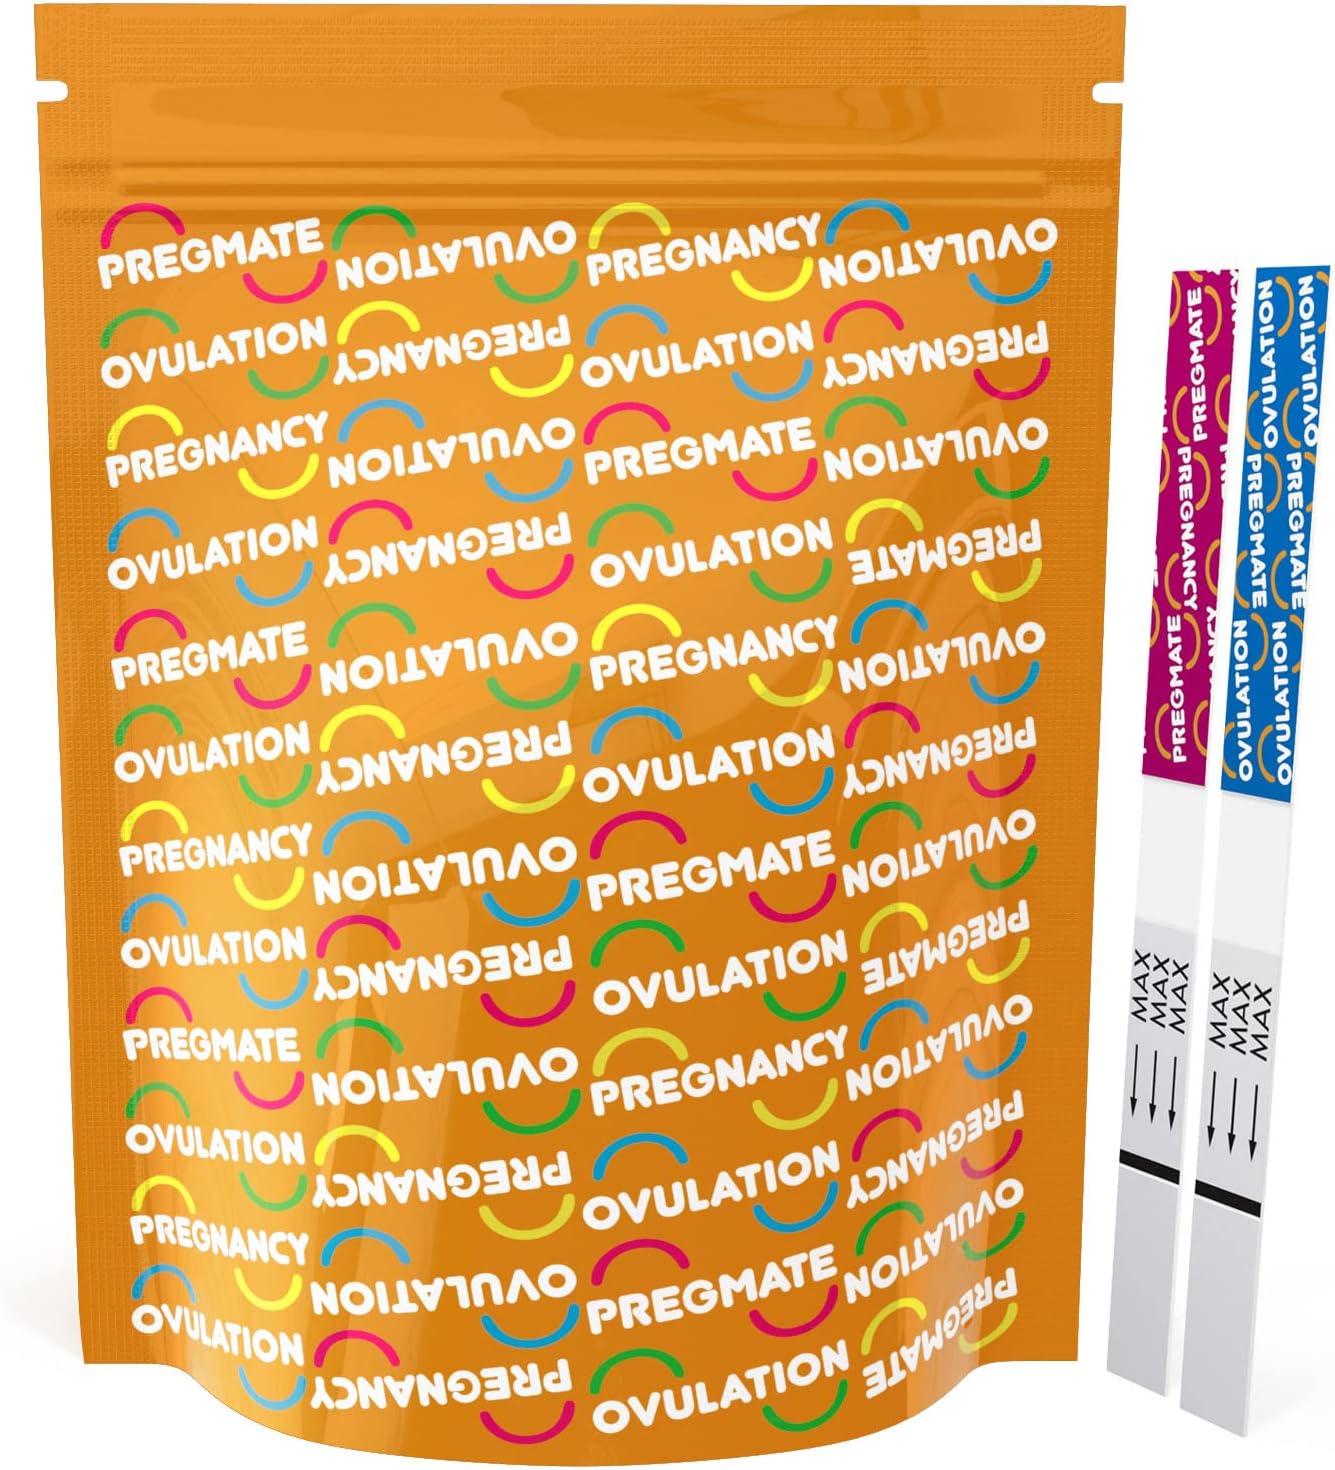 pregmate 100 ovulation test strips review